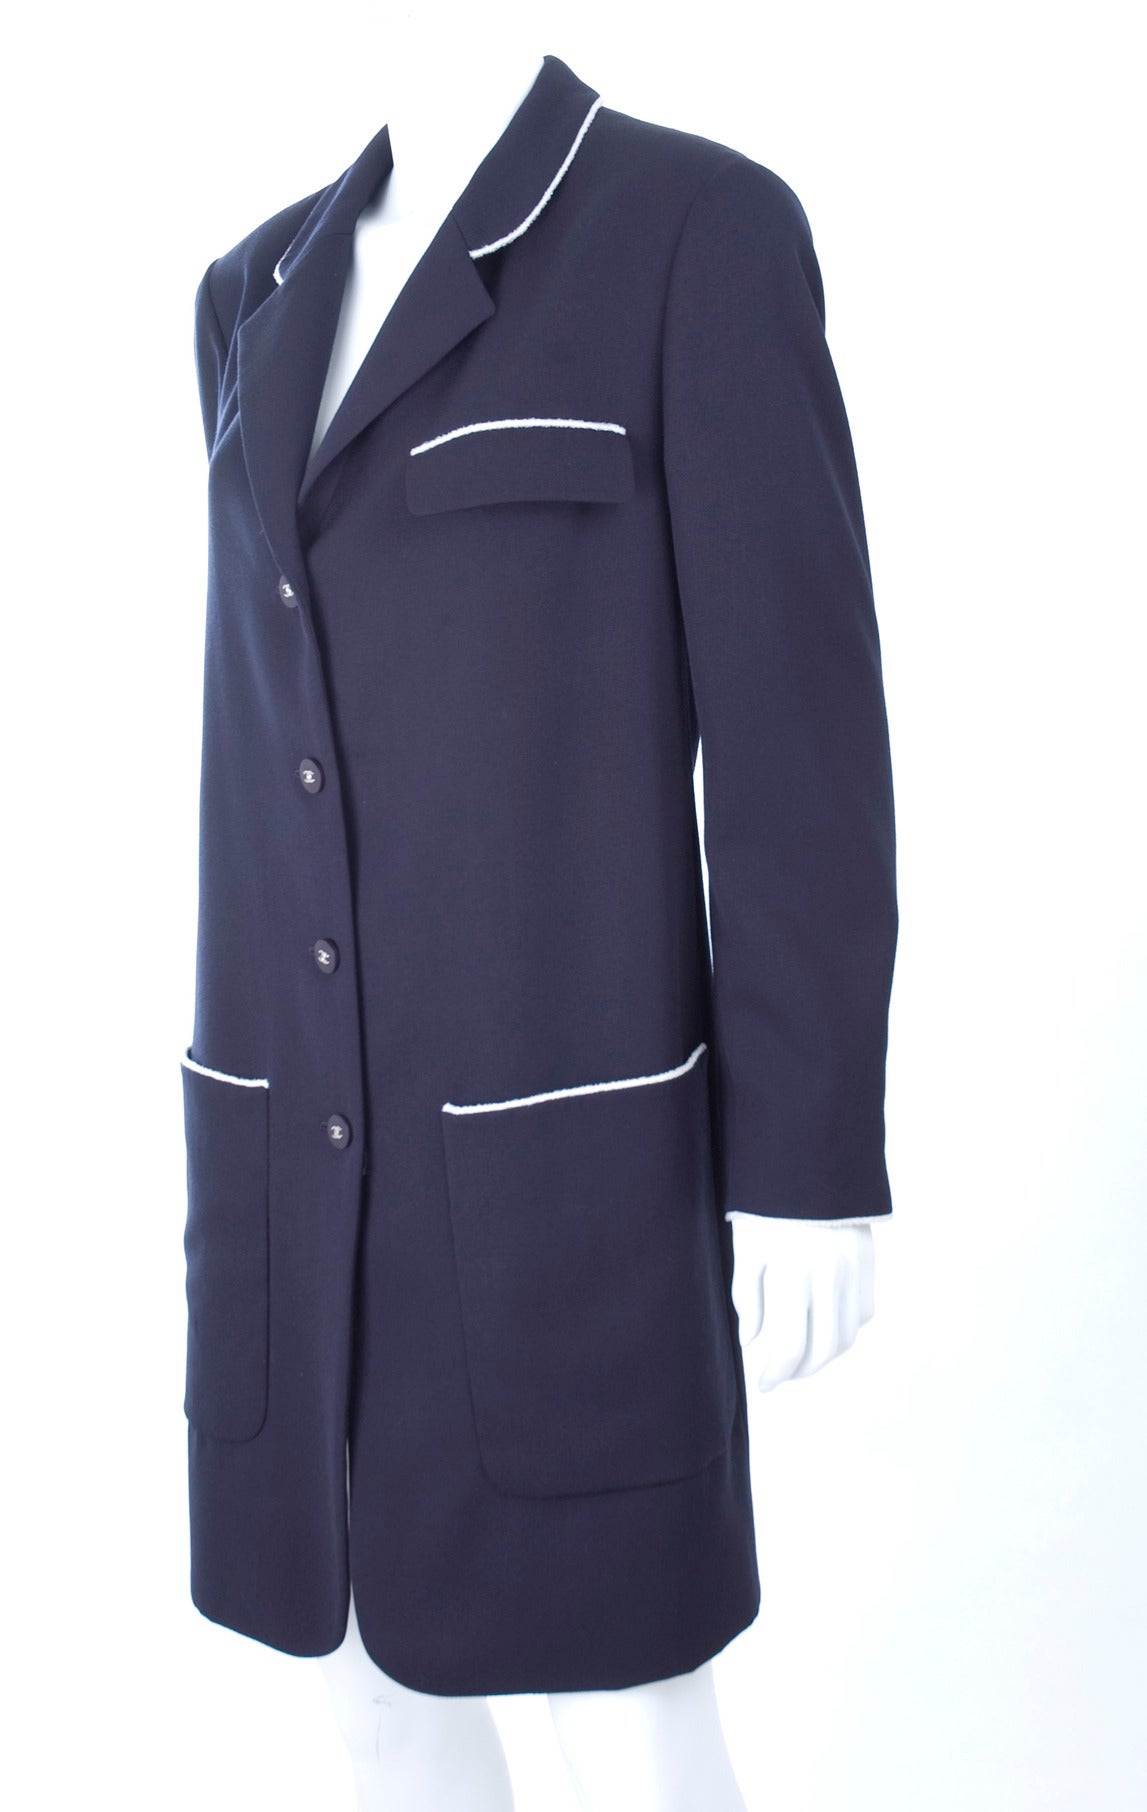 1996 Chanel Long Jacket or Coat size 48 In Excellent Condition For Sale In Hamburg, Deutschland